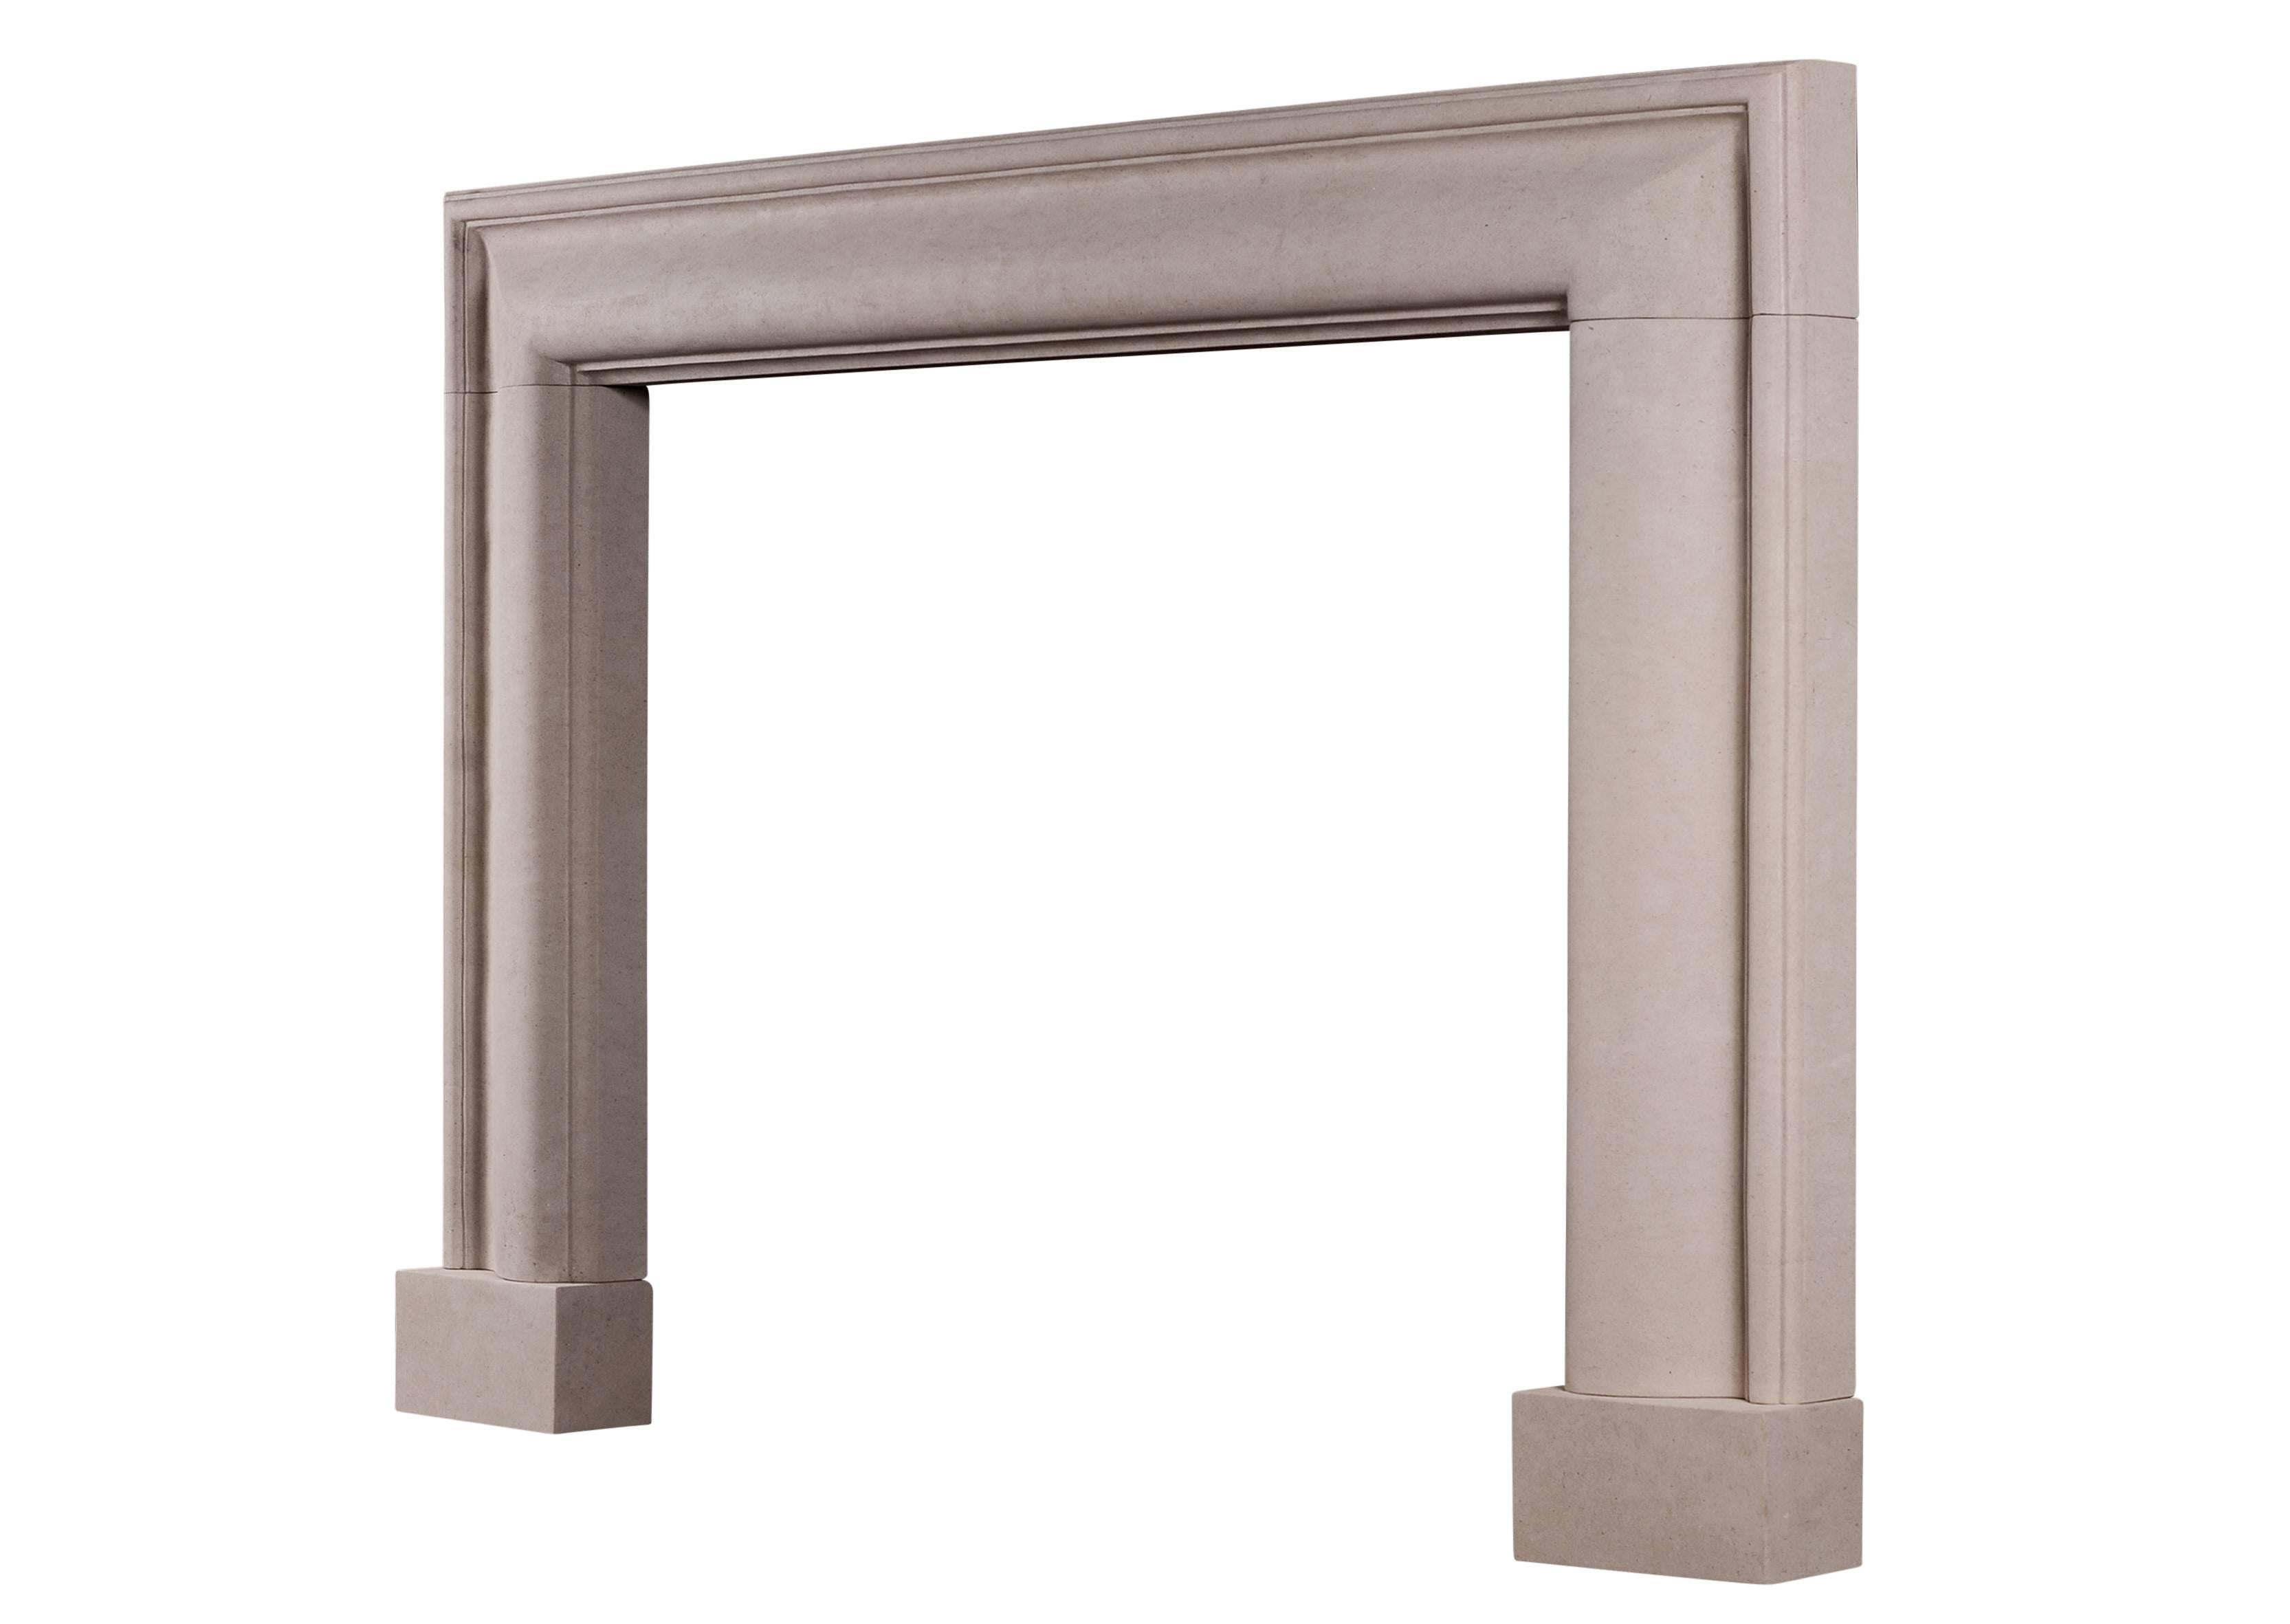 A stylish English moulded bolection fireplace in Portland stone. A good quality copy of the Queen Anne design. Could be made to any size and in other materials if required.

Measure: 
Shelf Width:	1372 mm      	54 in
Overall Height:	1200 mm      	47